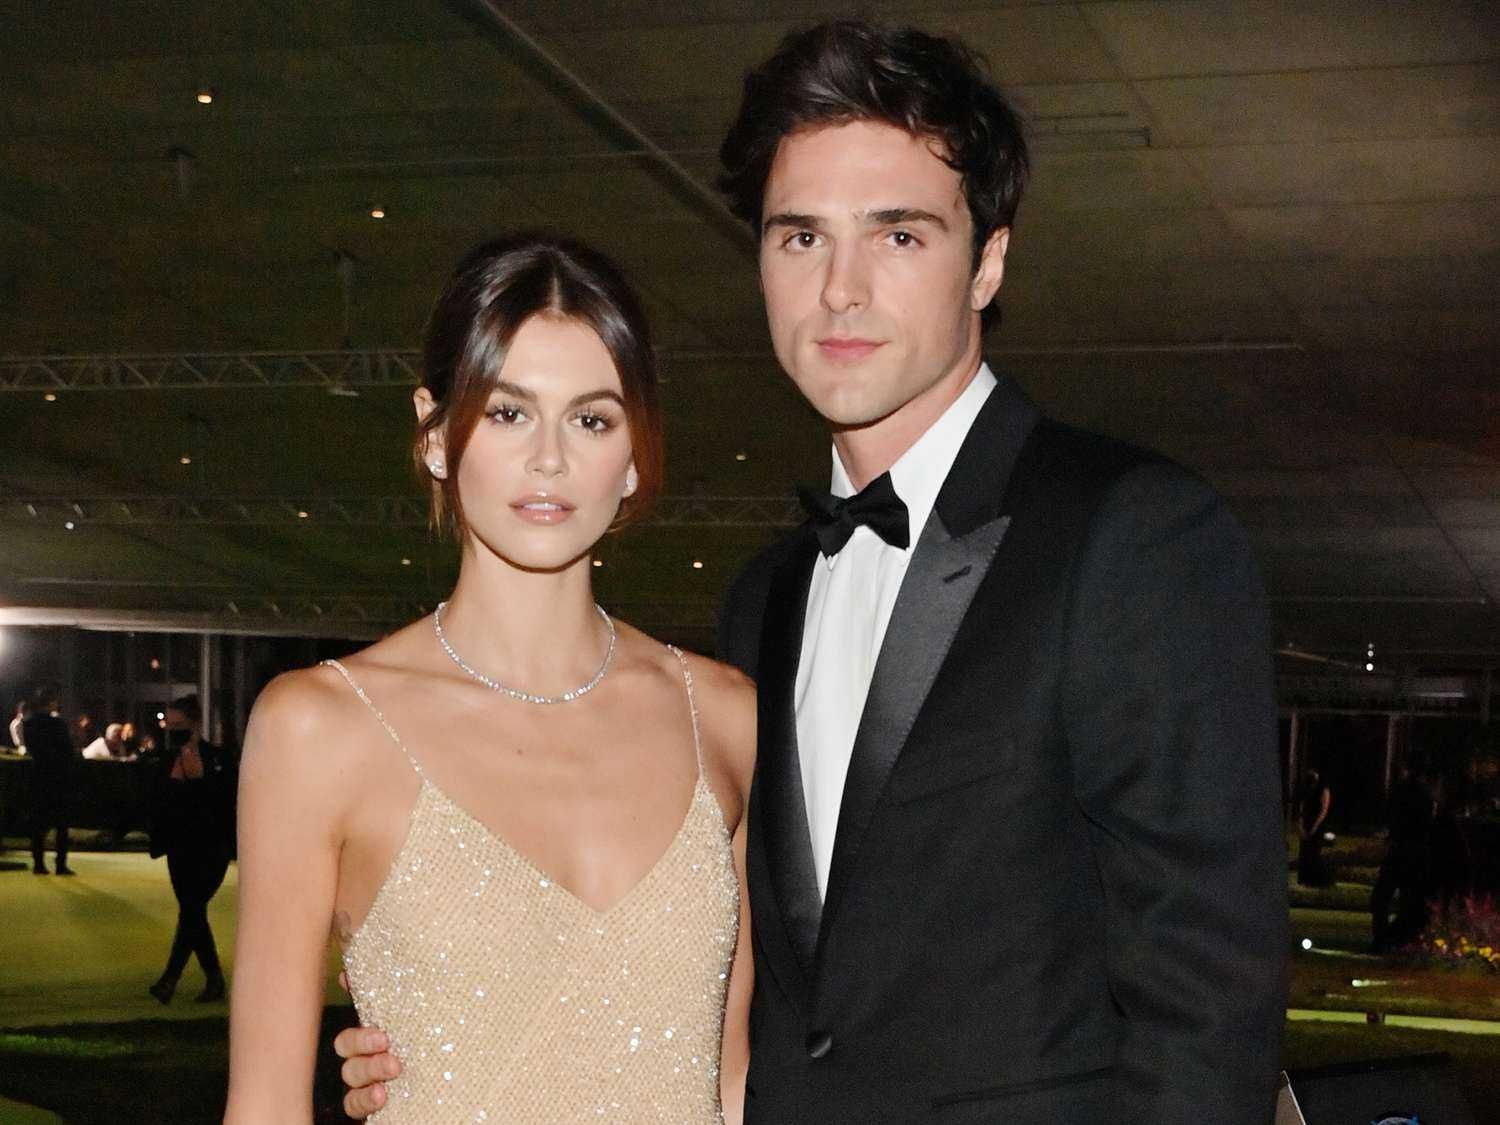 When Kaia Gerber opened up about love with Jacob Elordi